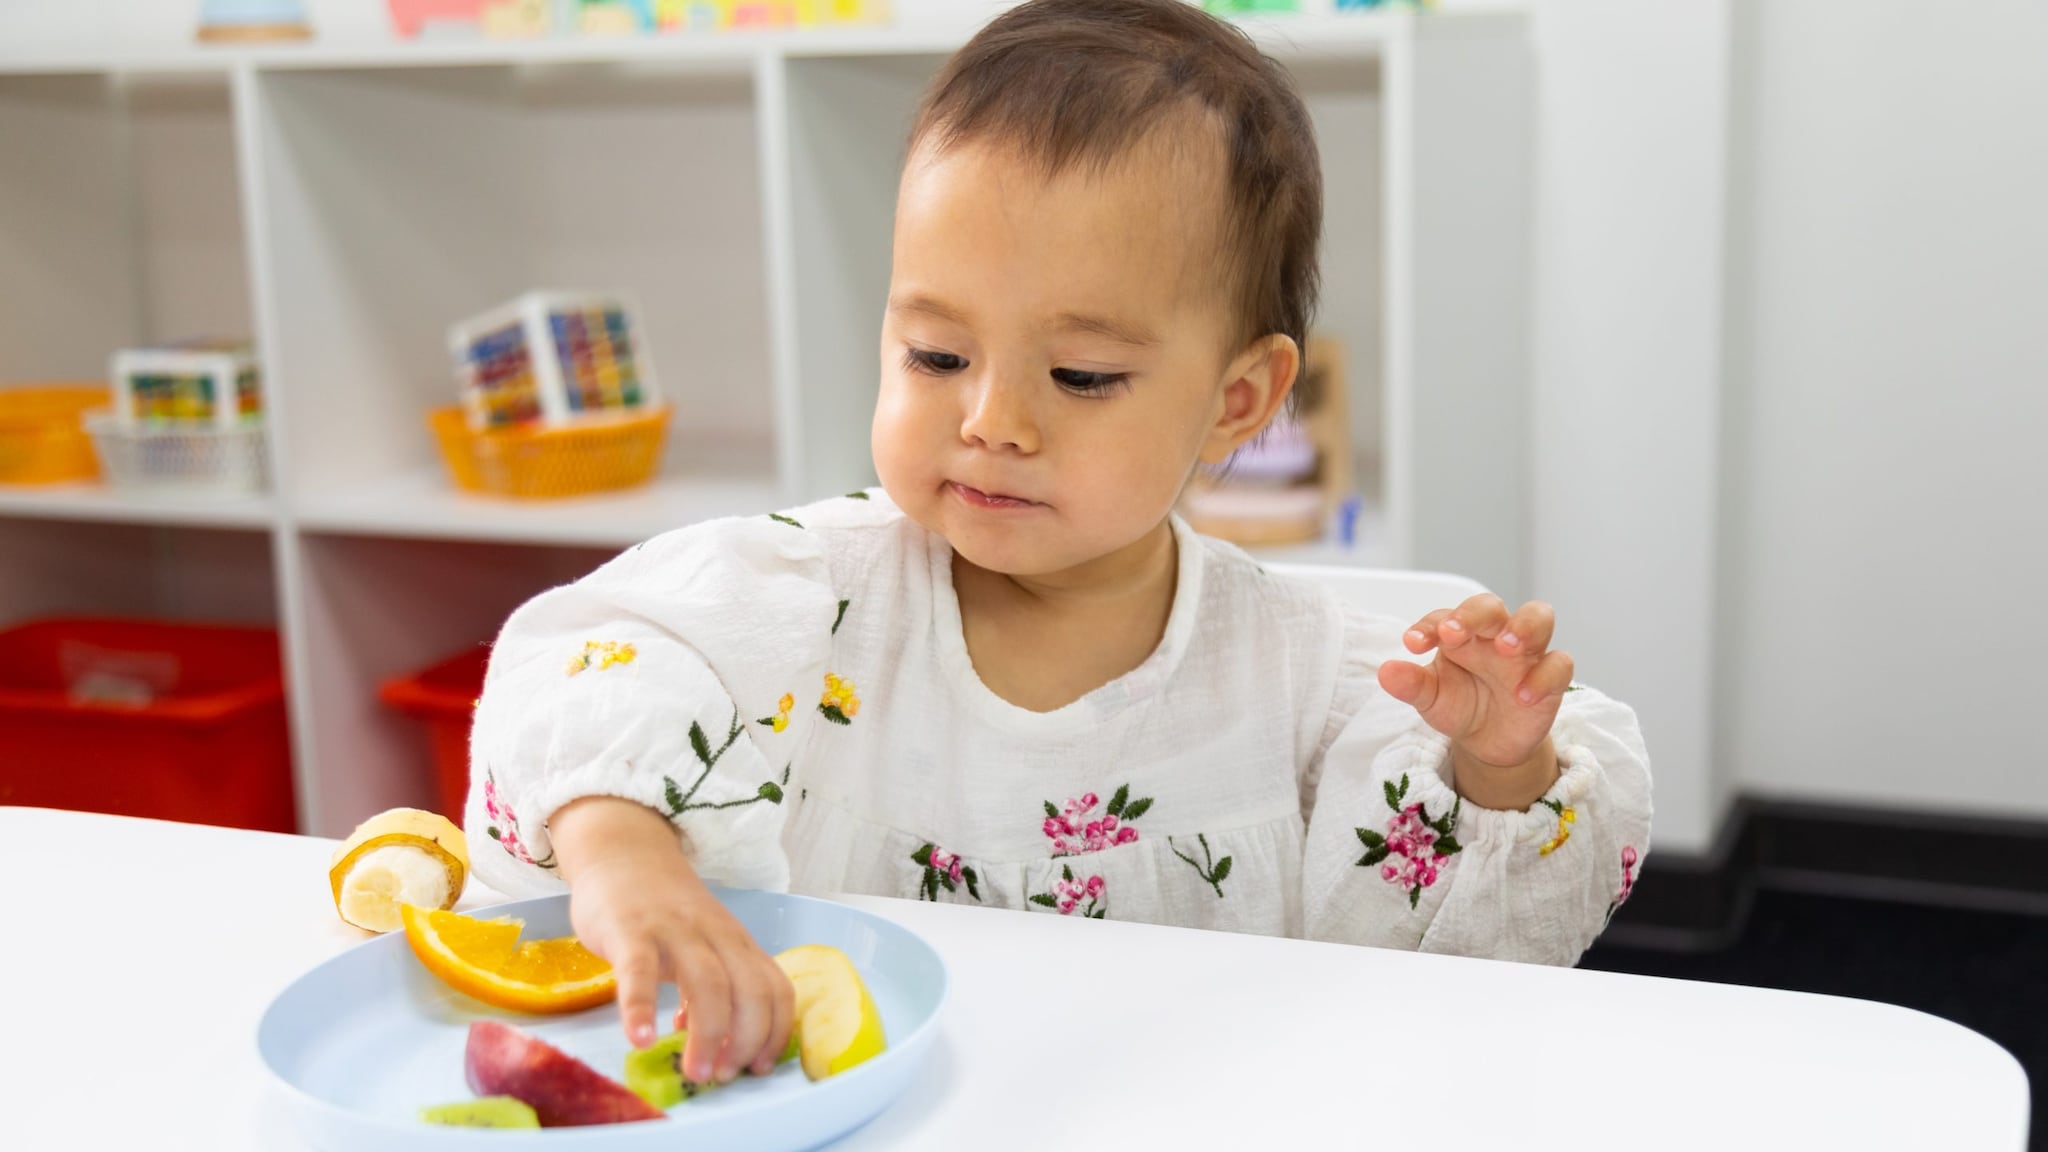 Young child in early care and education setting eating from a plate of fruit.